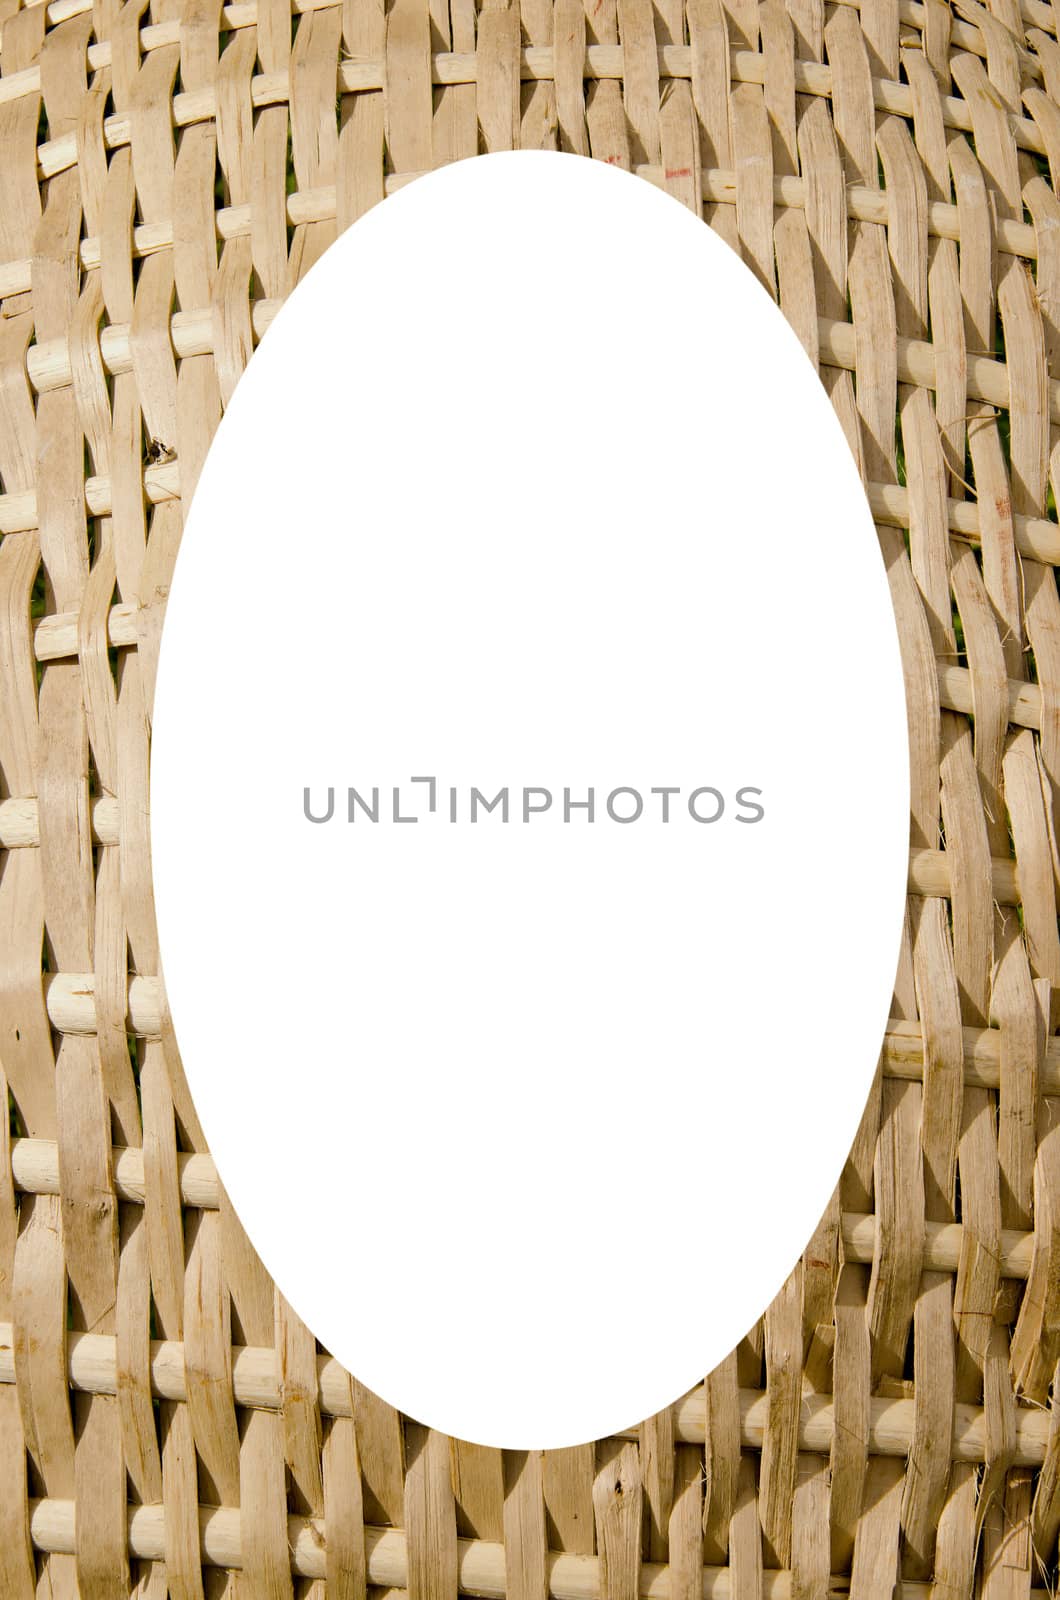 Isolated white oval place for text photograph image in center of frame. Wicker fragment background. Handmade interesting wooden backdrop.